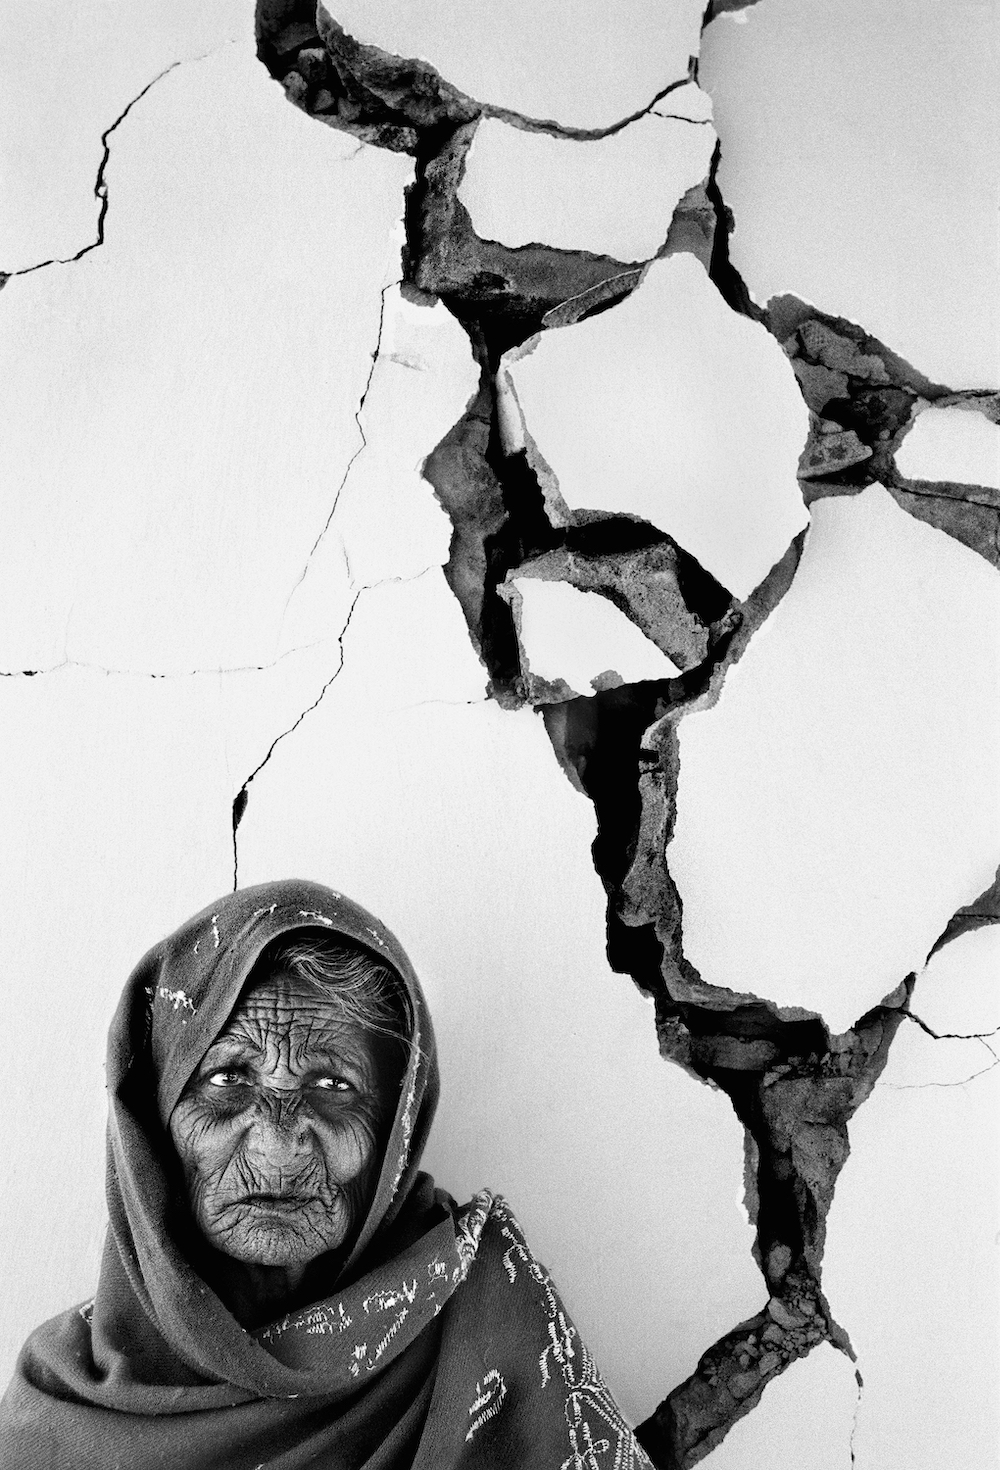 Anjar, India, February 2001: with silent dignity an elderly woman waits for aid to arrive at her stricken village near Anjar, Gujarat, after the earthquake of 2001. The quake lasting 90 seconds killed 20,000 people in the north western state of Gujarat, left 200,000 injured and countless homeless. Photo: © Tom Stoddart